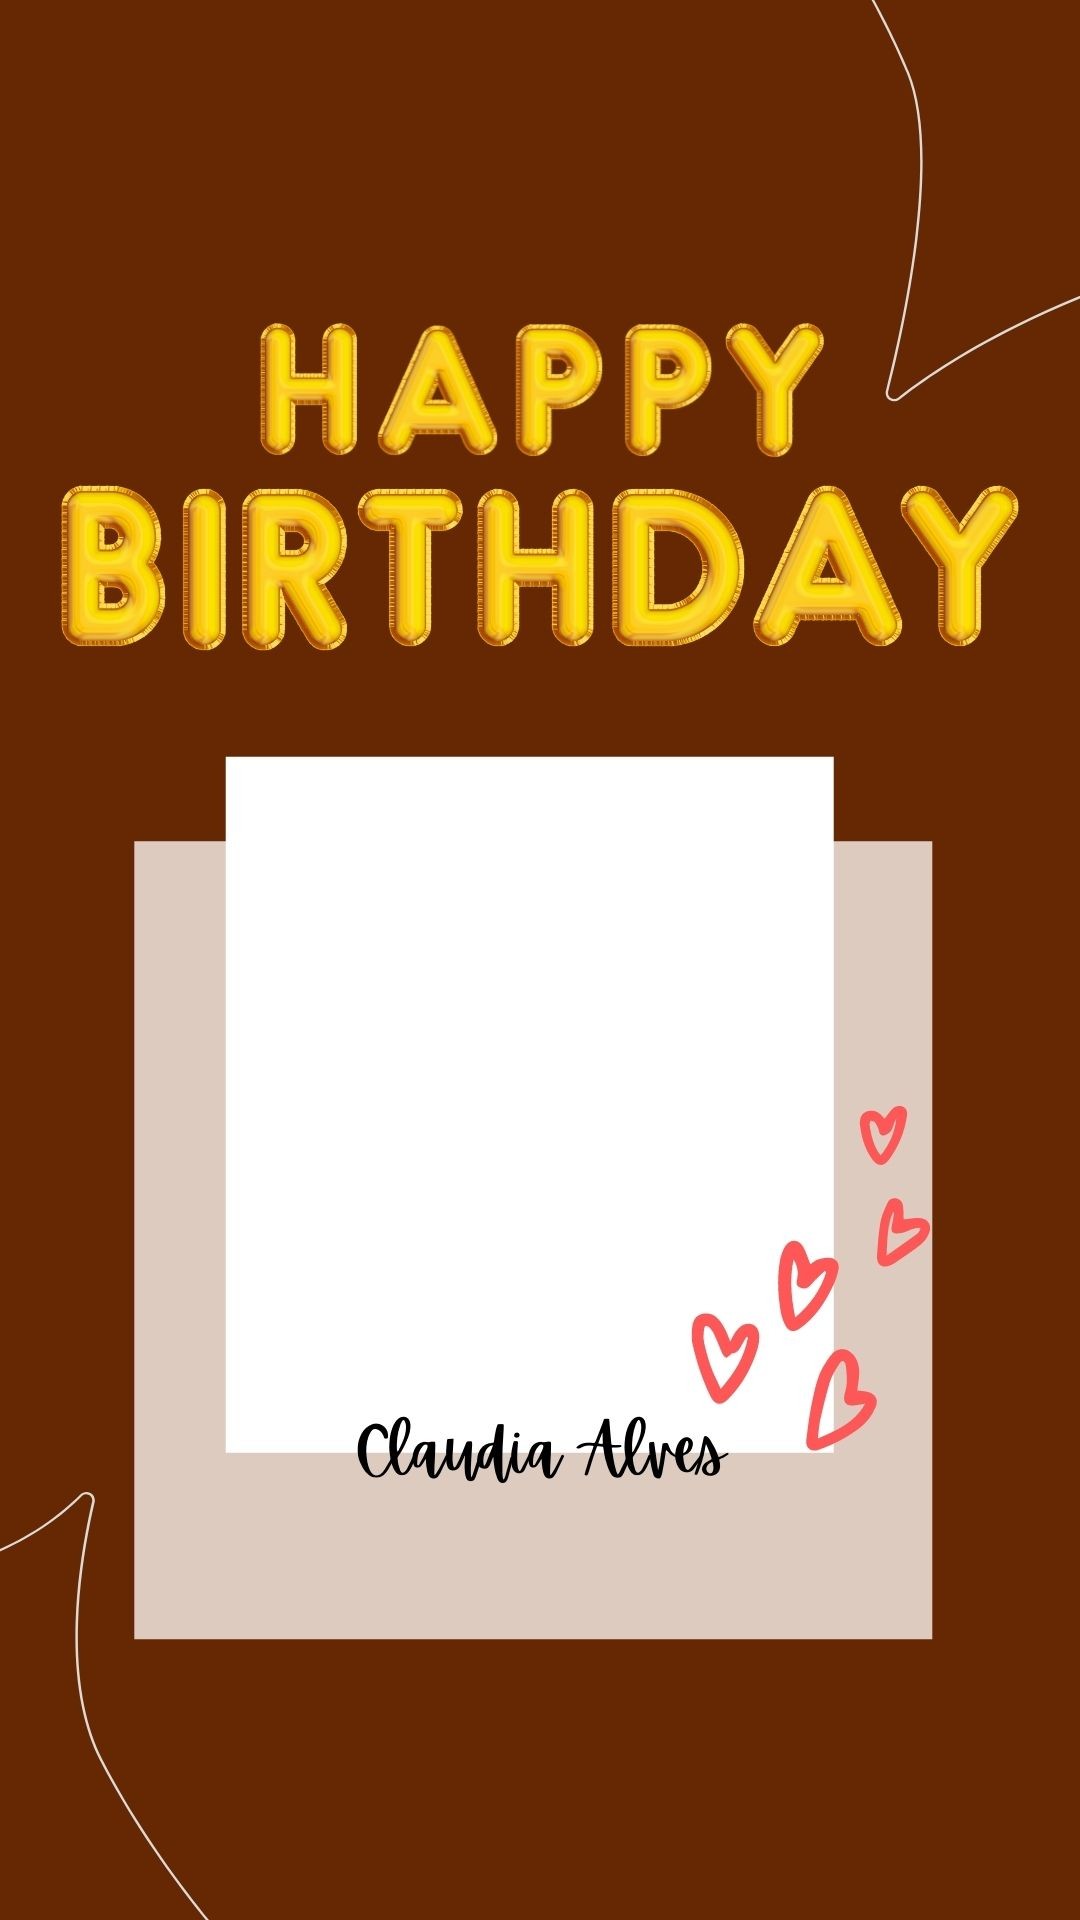 Happy birthday instagram story background brown color